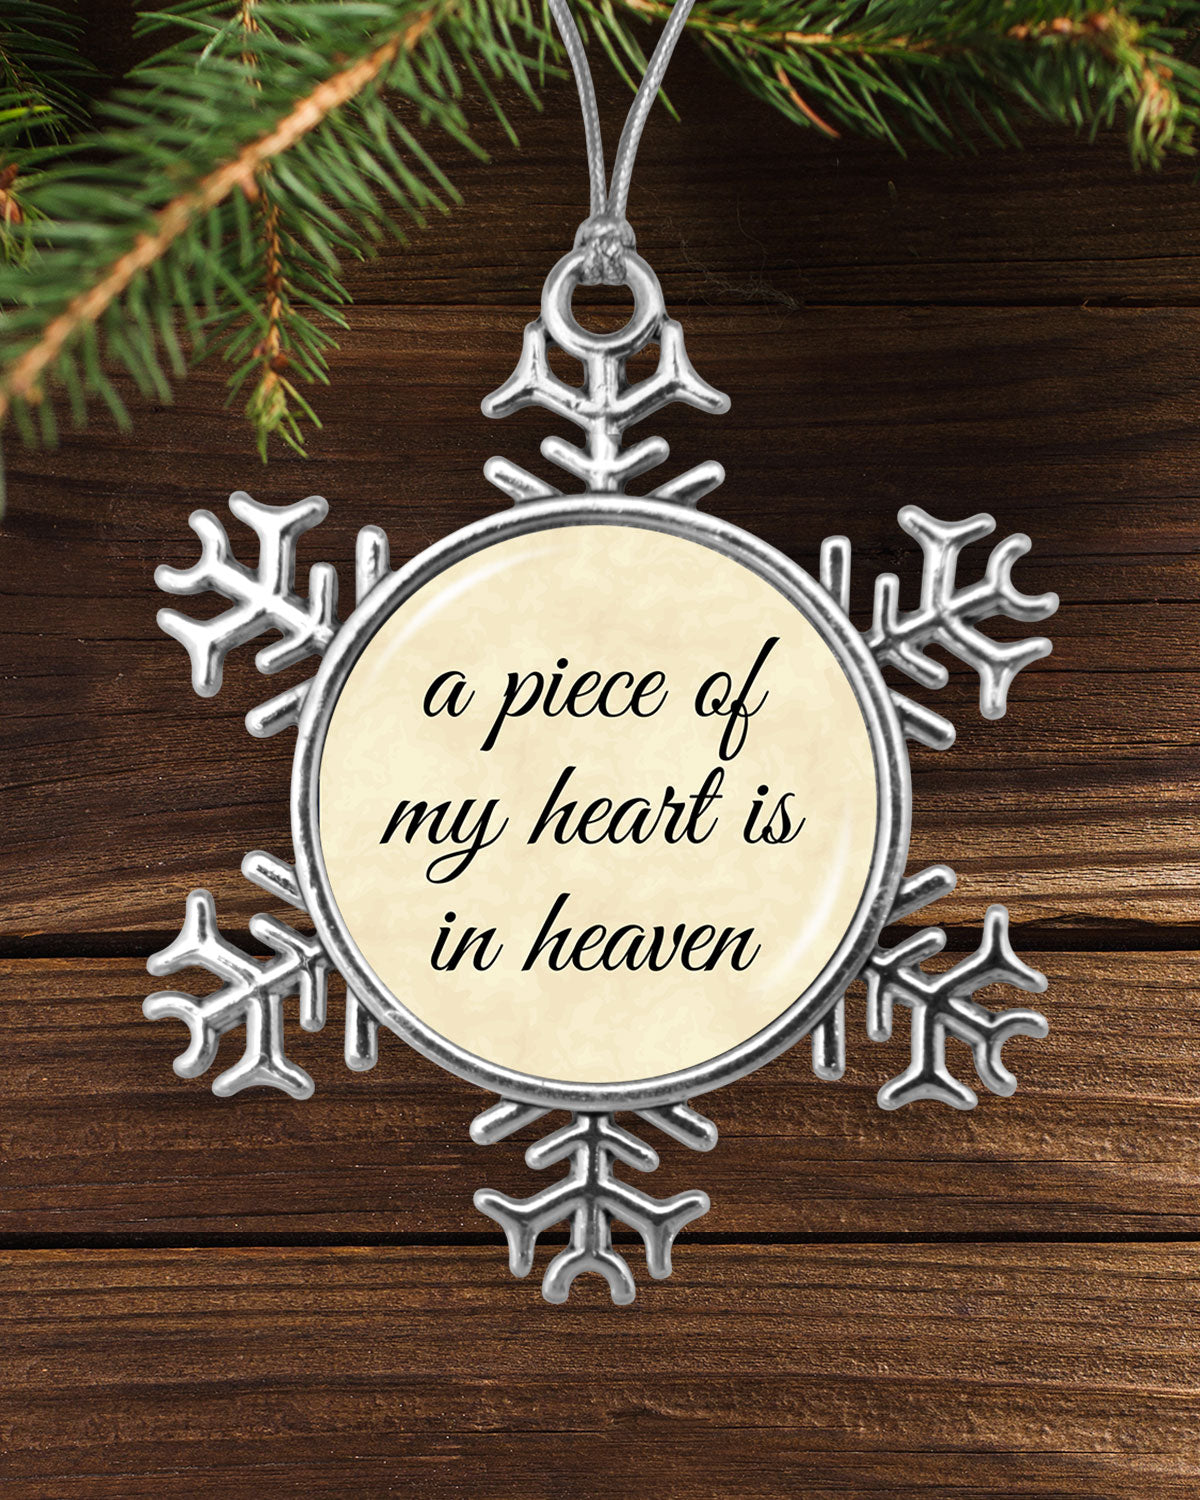 A Piece Of My Heart Is In Heaven Snowflake Ornament